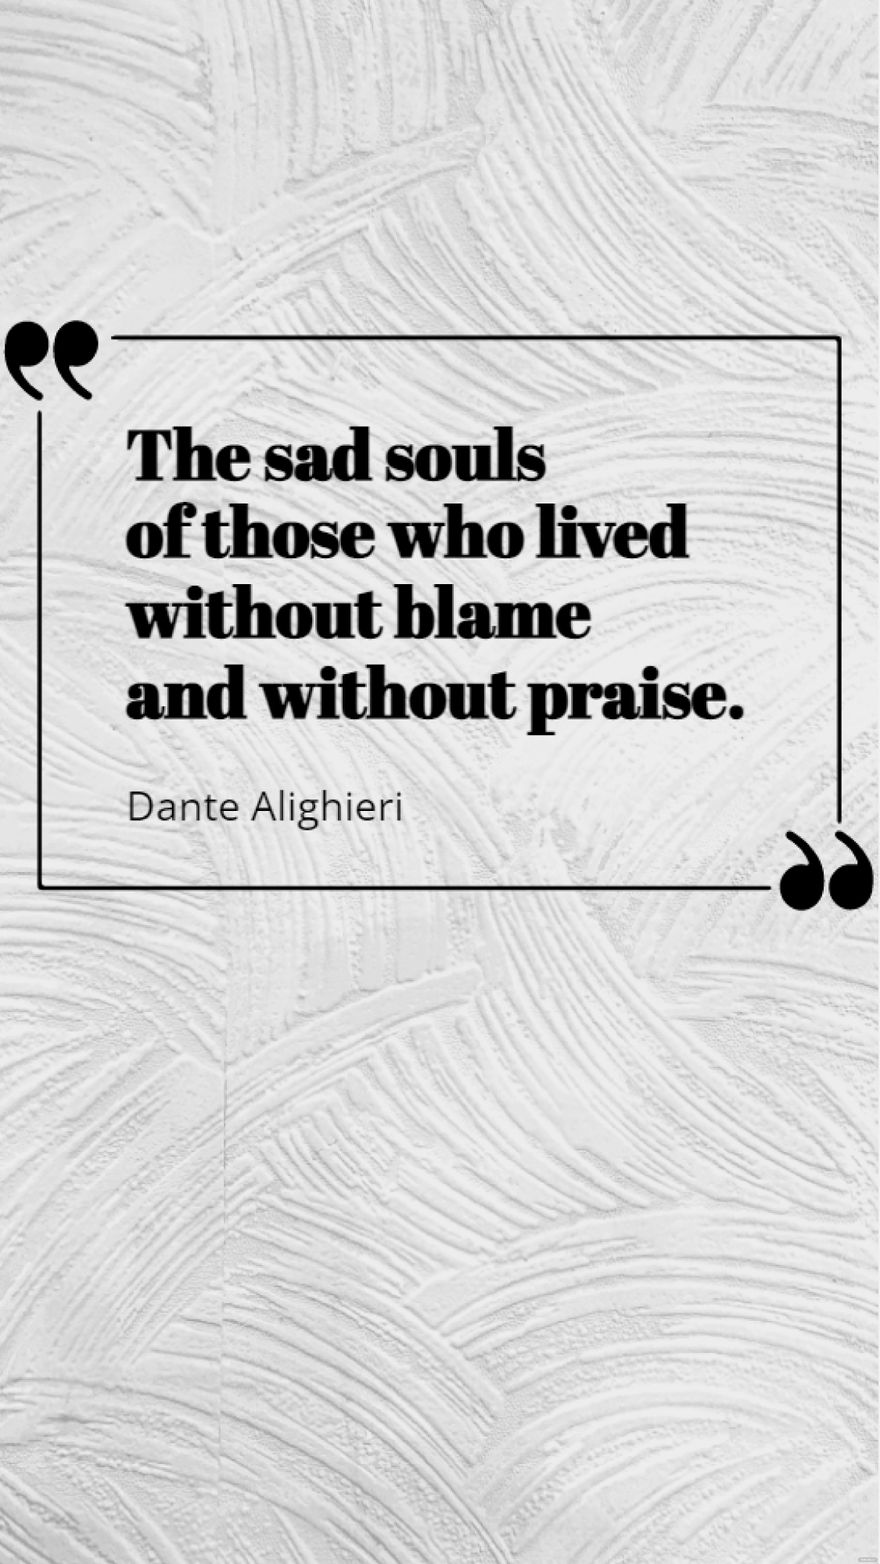 Dante Alighieri - The sad souls of those who lived without blame and without praise. Template